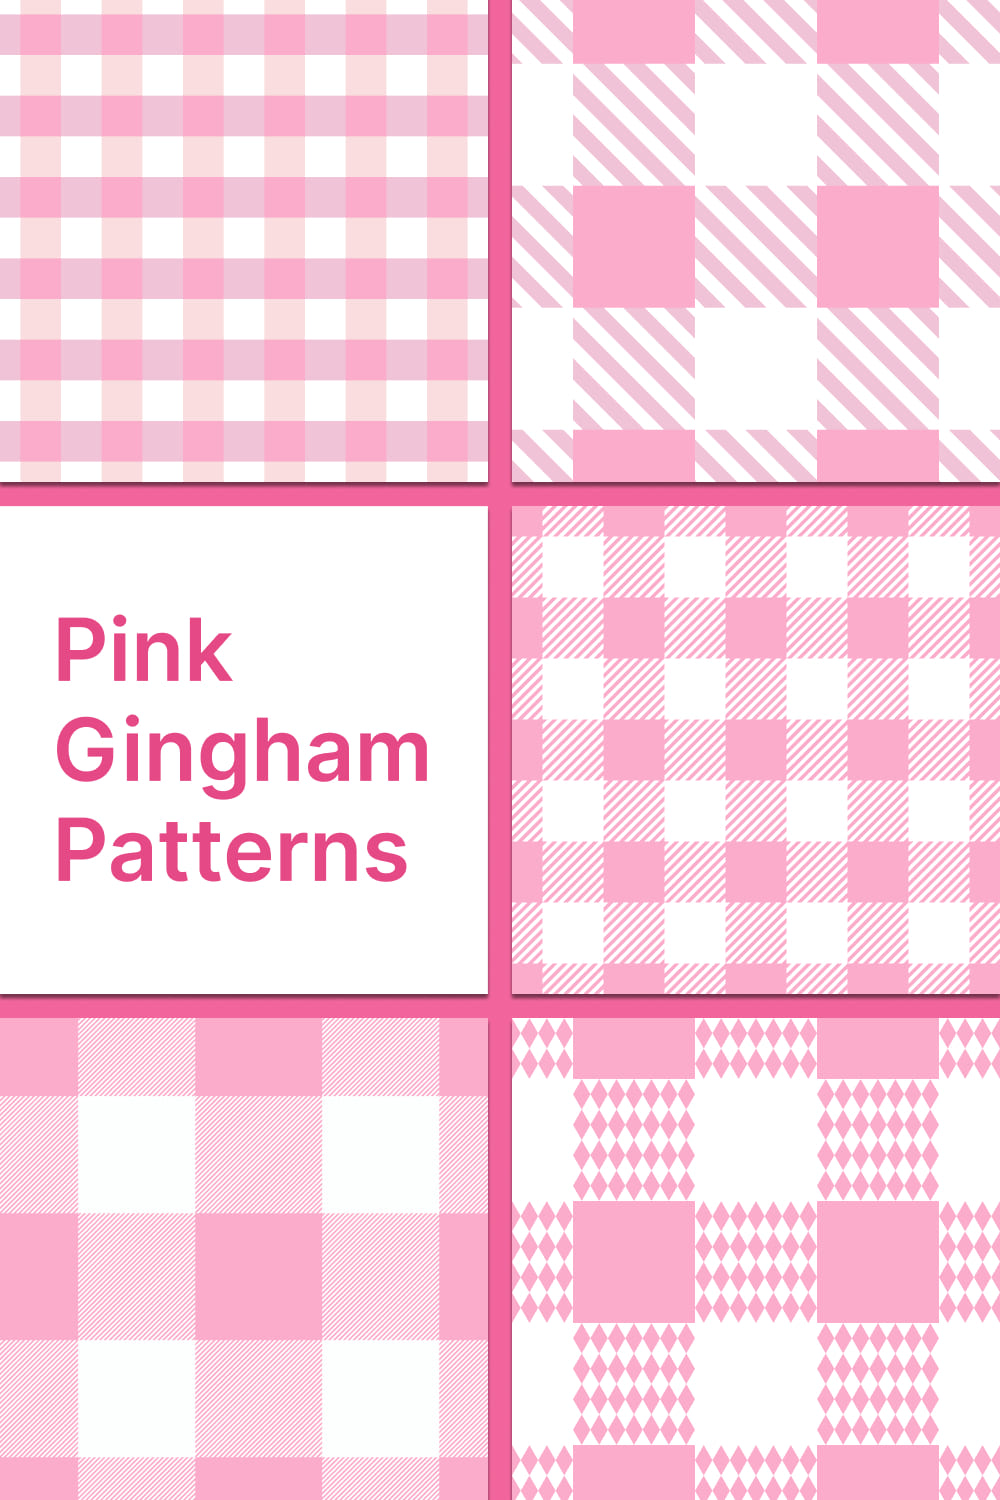 Pattern with pink gingham prints.